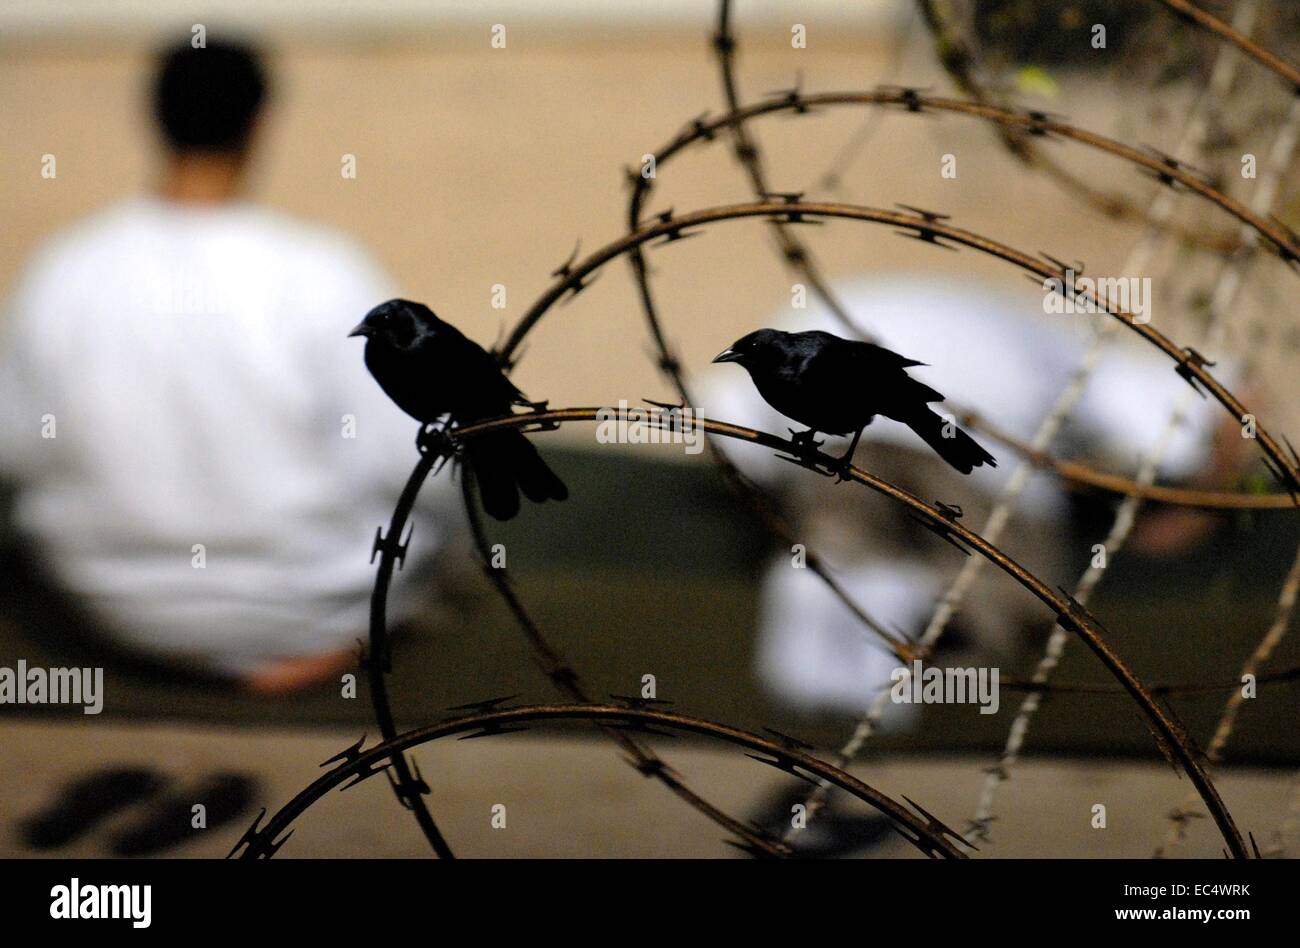 Enemy combatants held as detainees at the Joint Task Force Guantanamo observe morning prayer before sunrise inside Camp Delta November 19, 2009 in Guantanamo, Cuba. The detainees were captured in the wars in Iraq and Afghanistan. Stock Photo